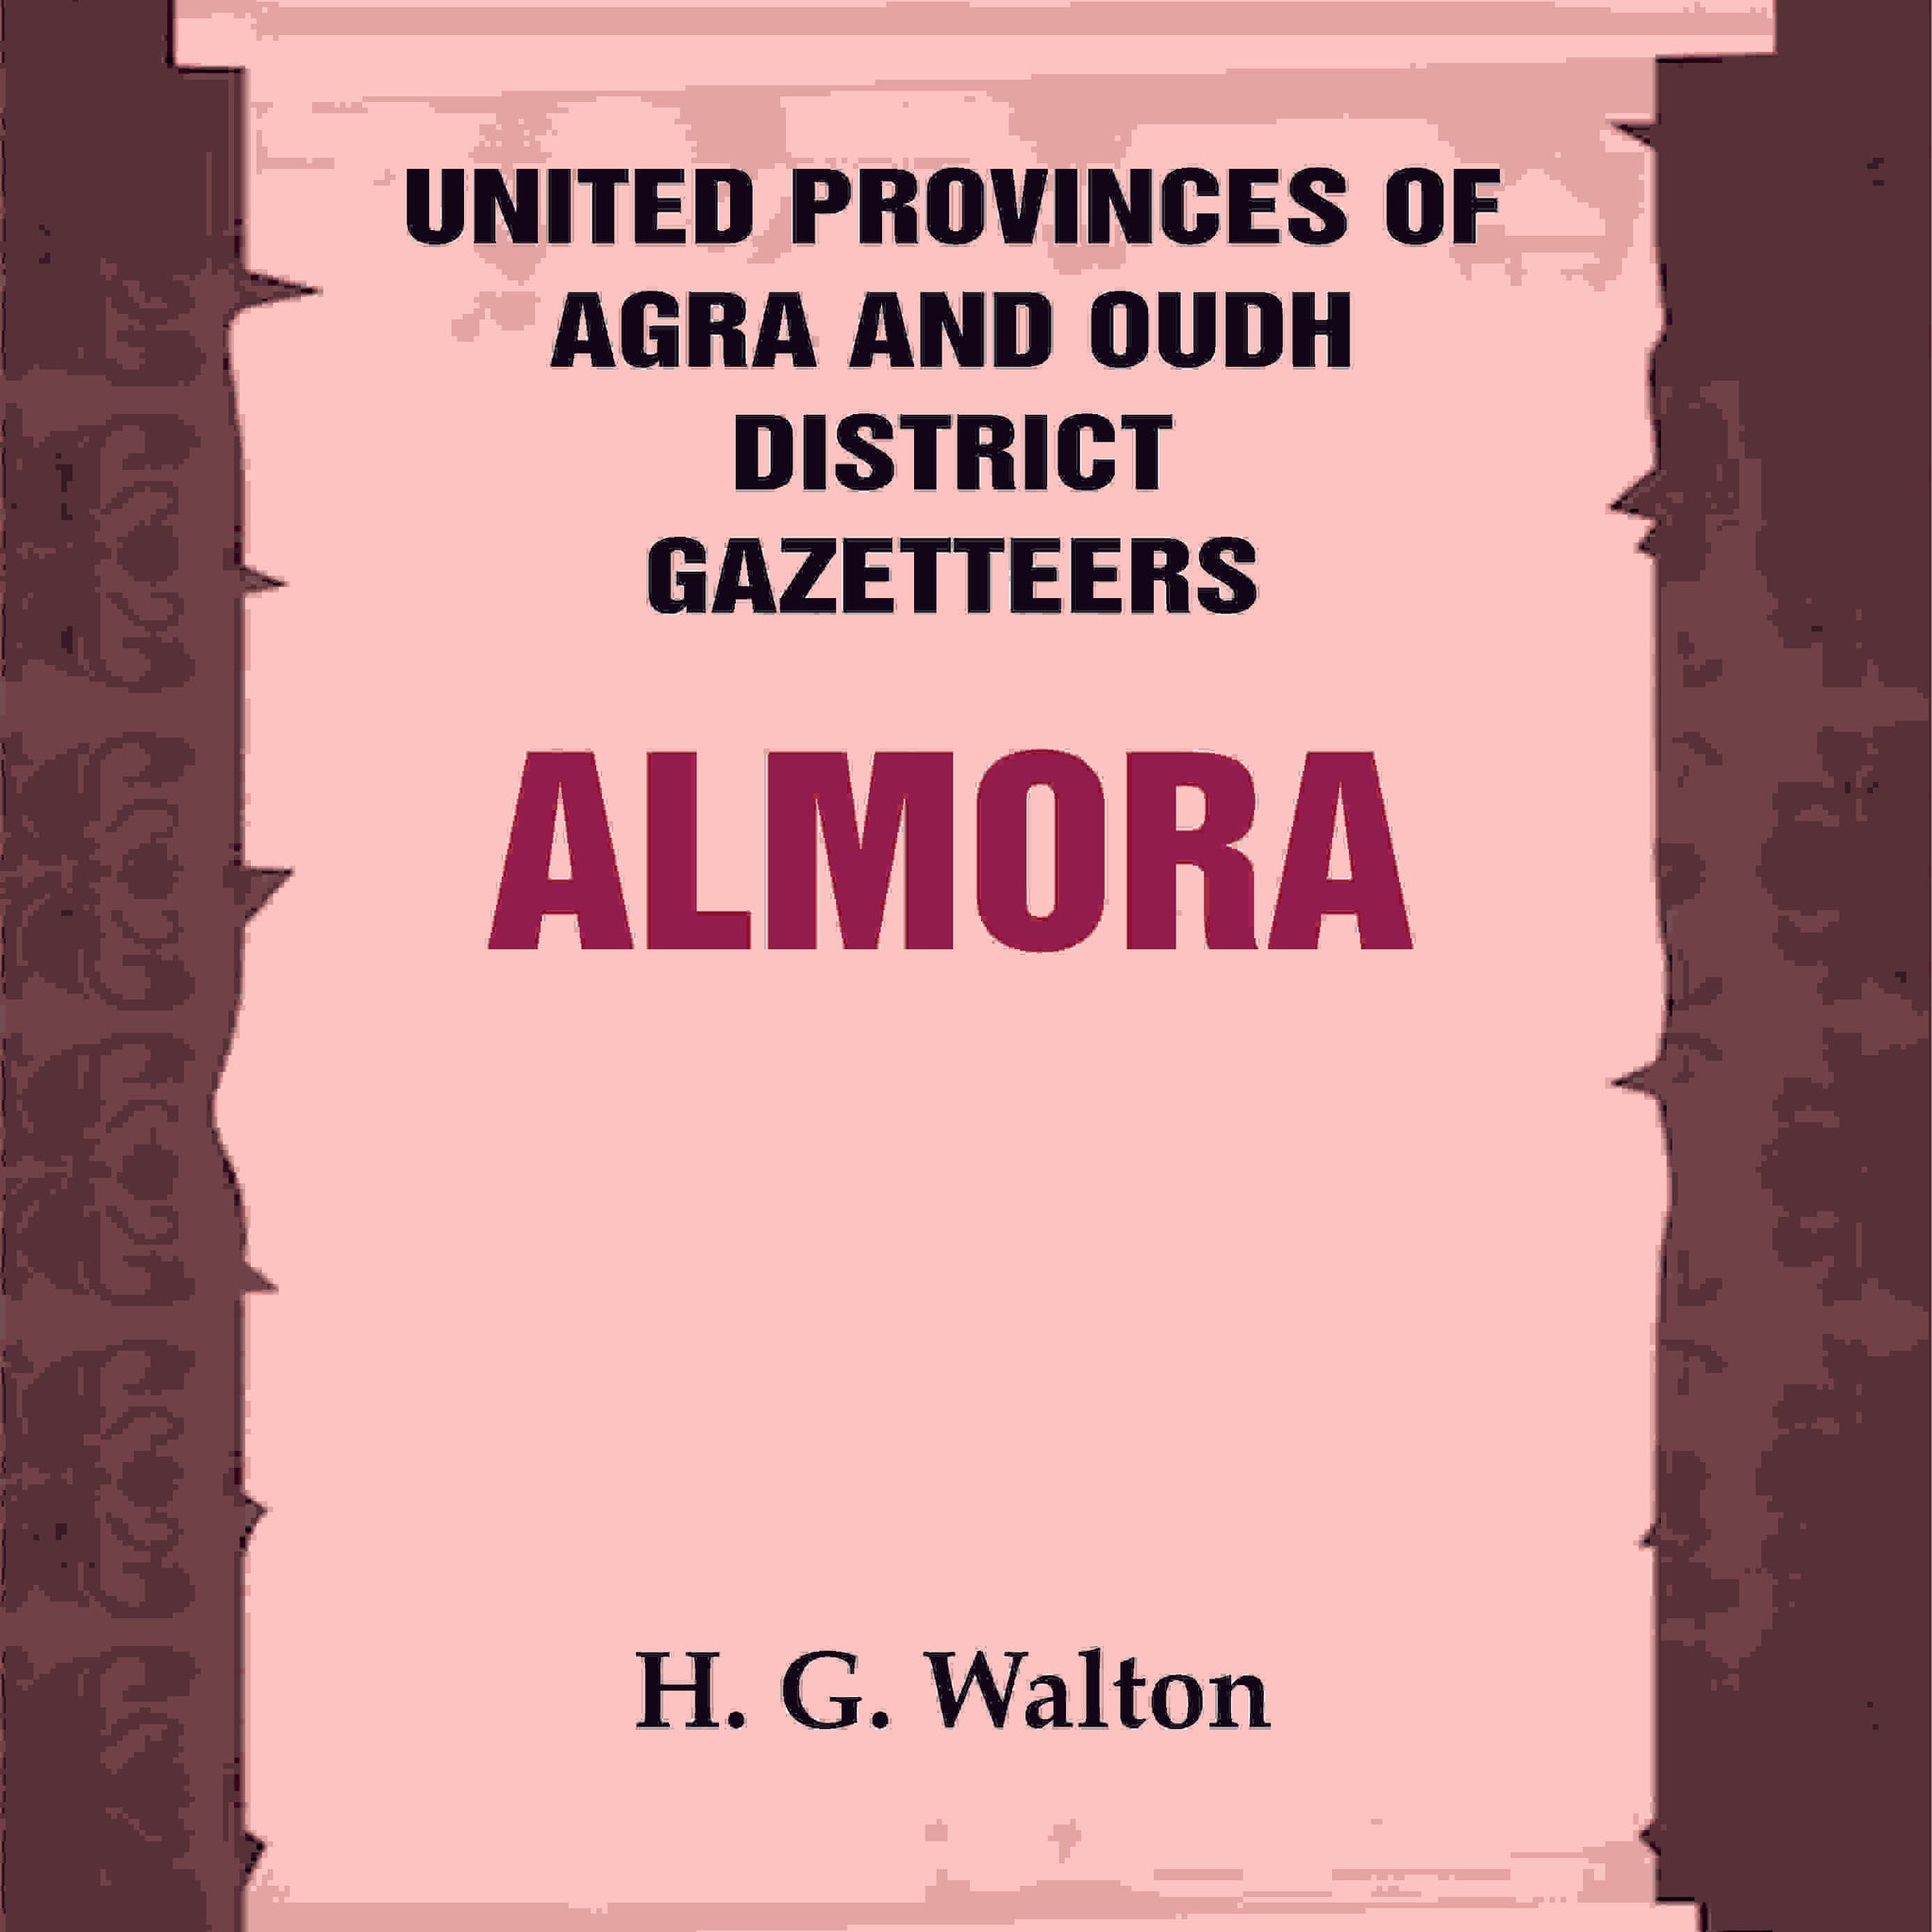 United Provinces of Agra and Oudh District Gazetteers: Almora